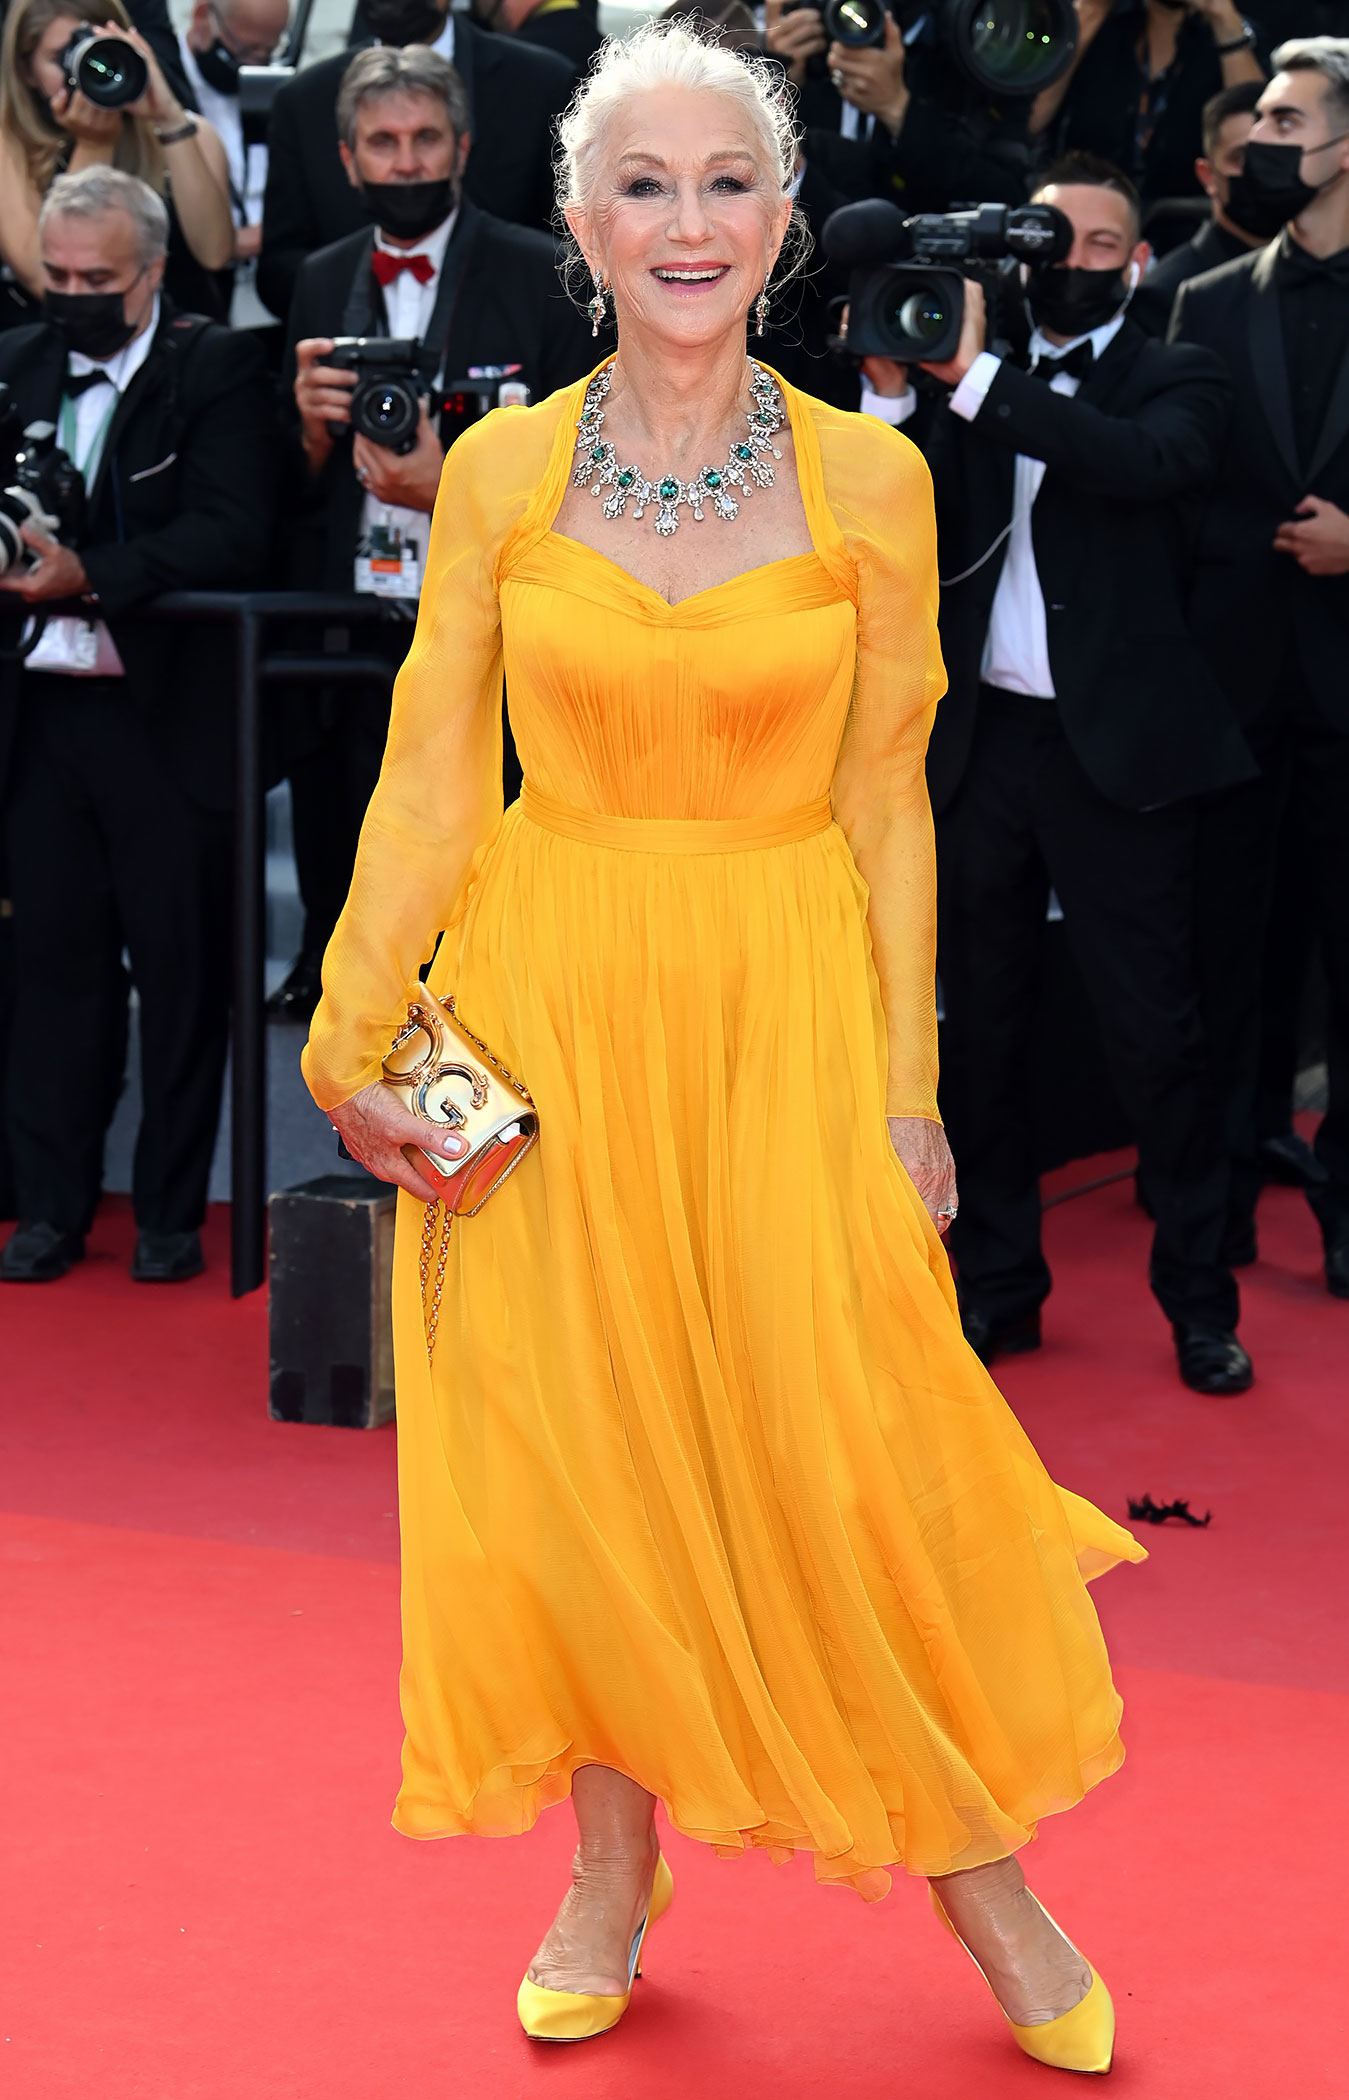 See What the Stars Wore to the 2021 Cannes Film Festival